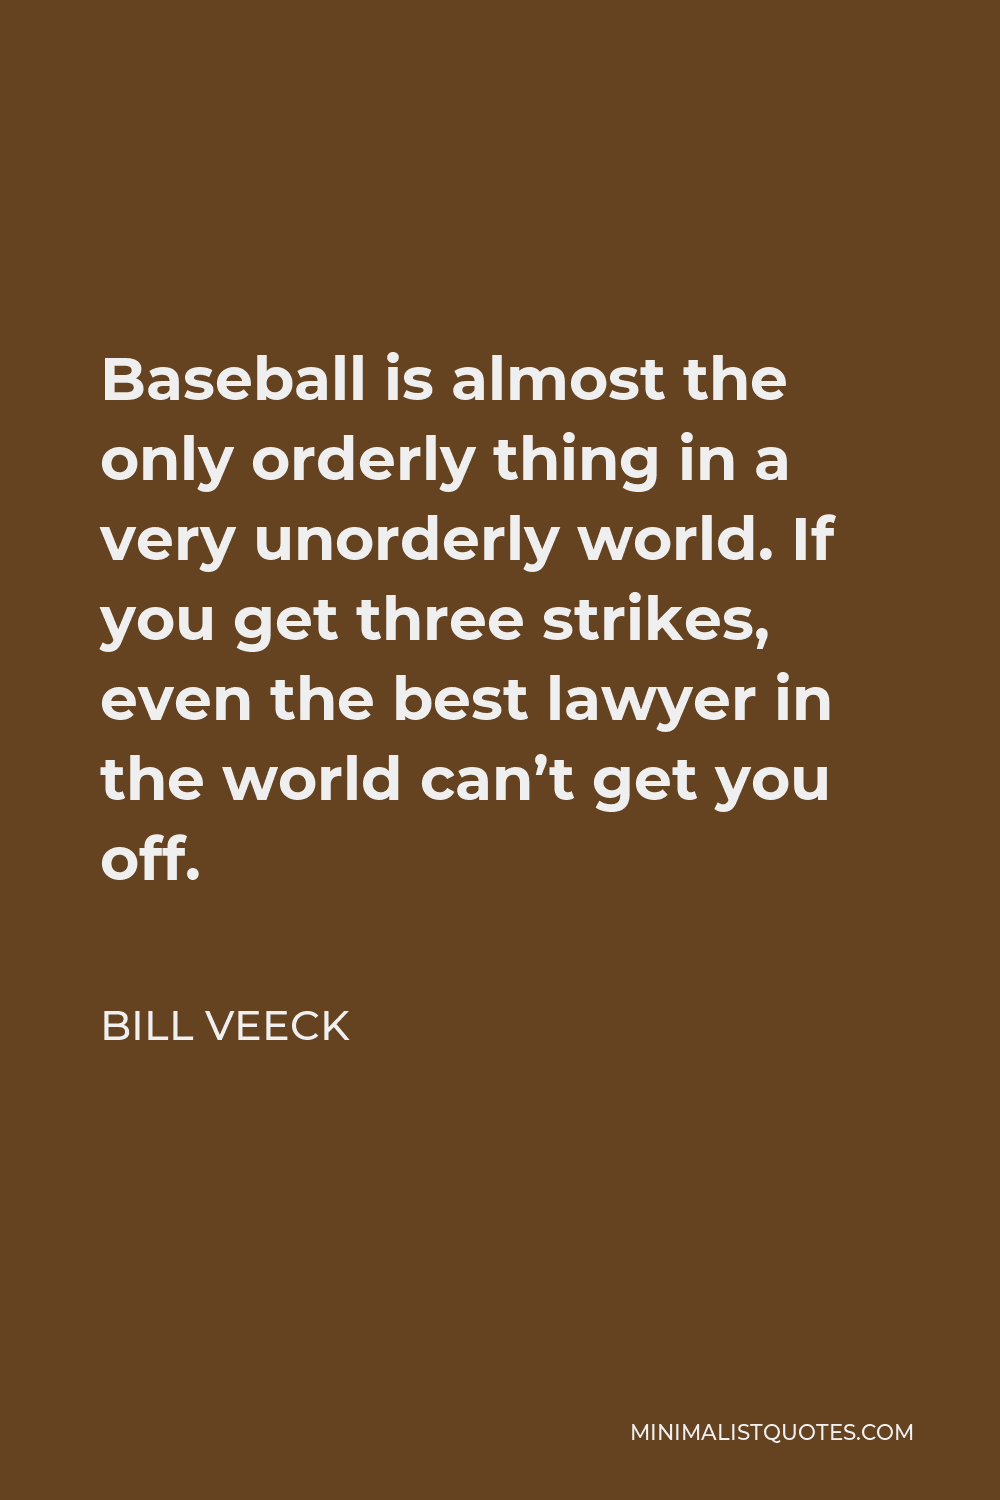 Bill Veeck Quote - Baseball is almost the only orderly thing in a very unorderly world. If you get three strikes, even the best lawyer in the world can’t get you off.